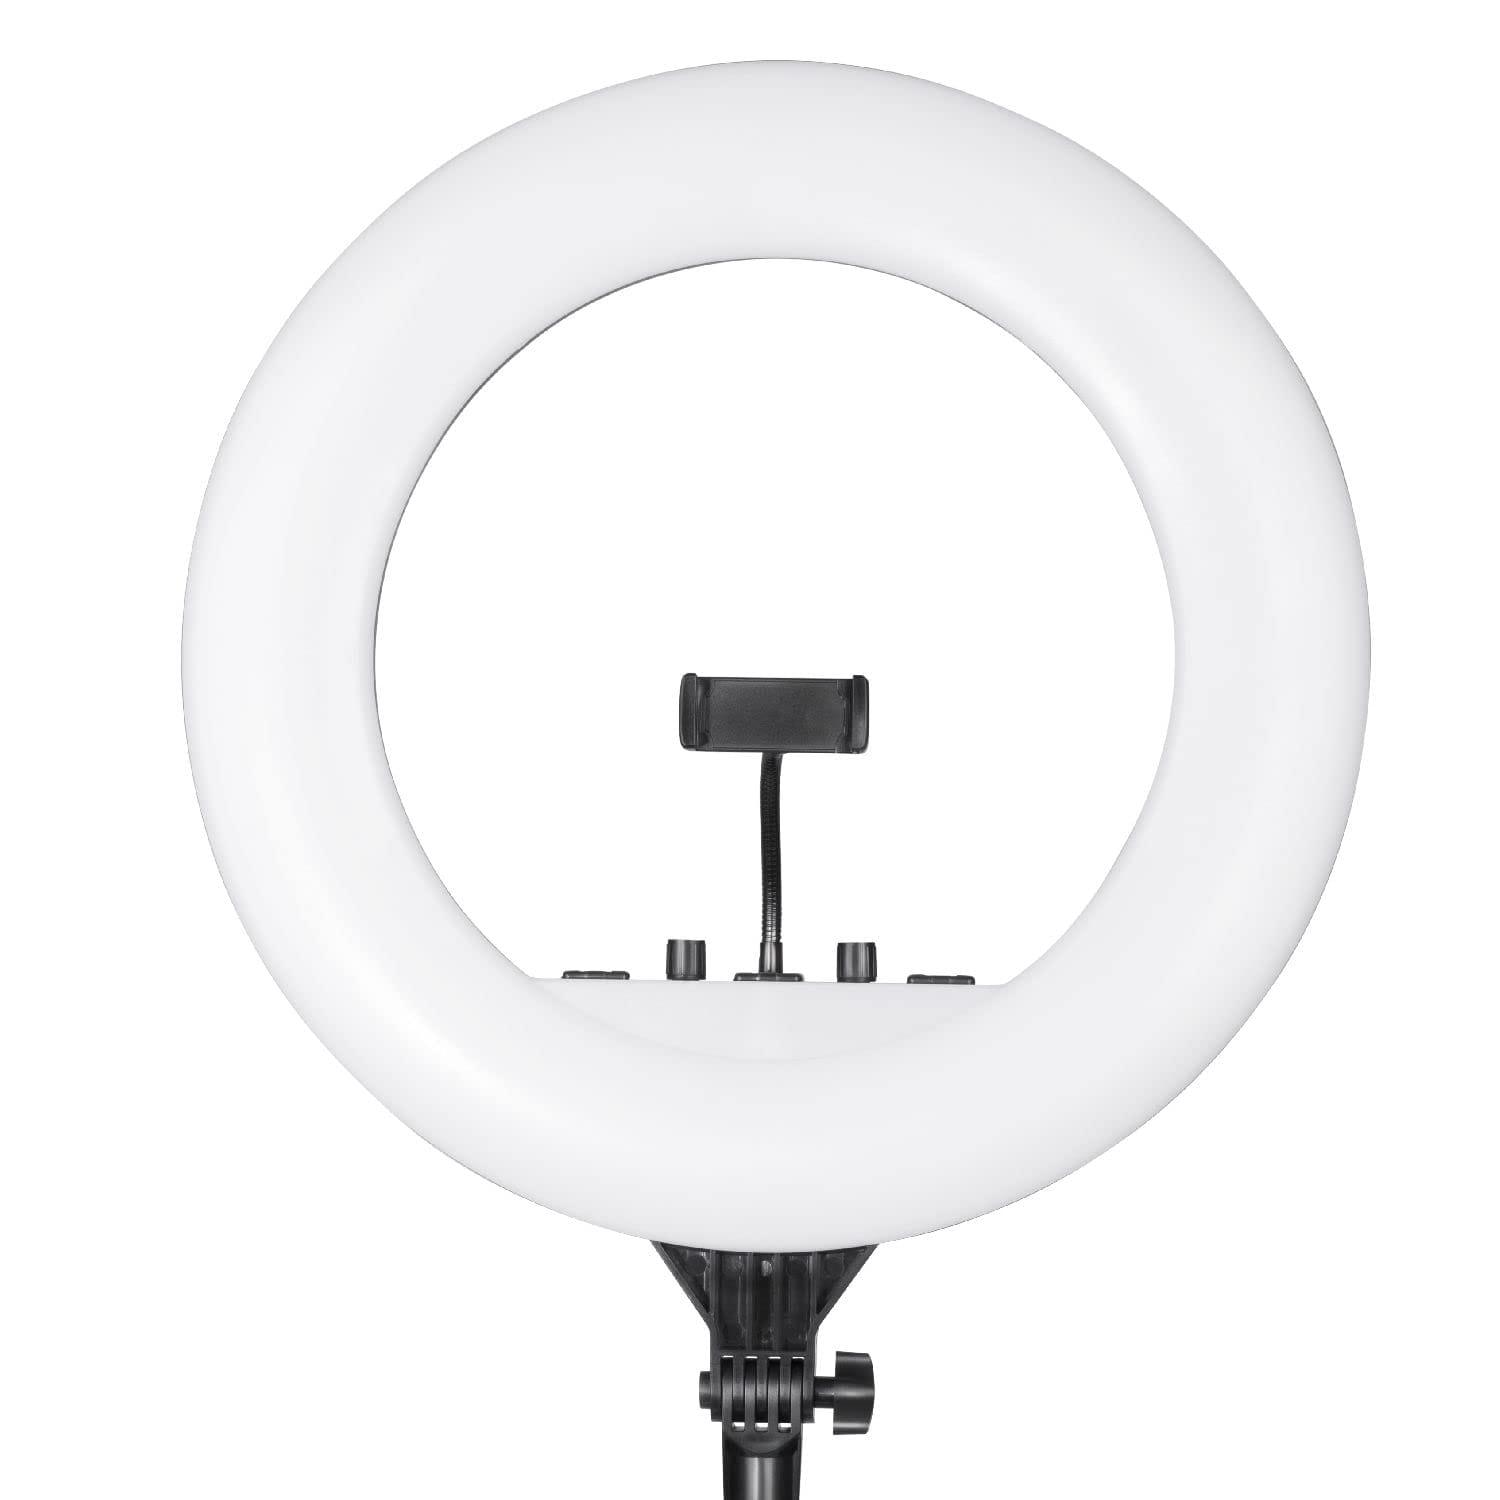 Dc Ring light 18inch touch panel, Three Phase at Rs 900/piece in New Delhi  | ID: 27430083888